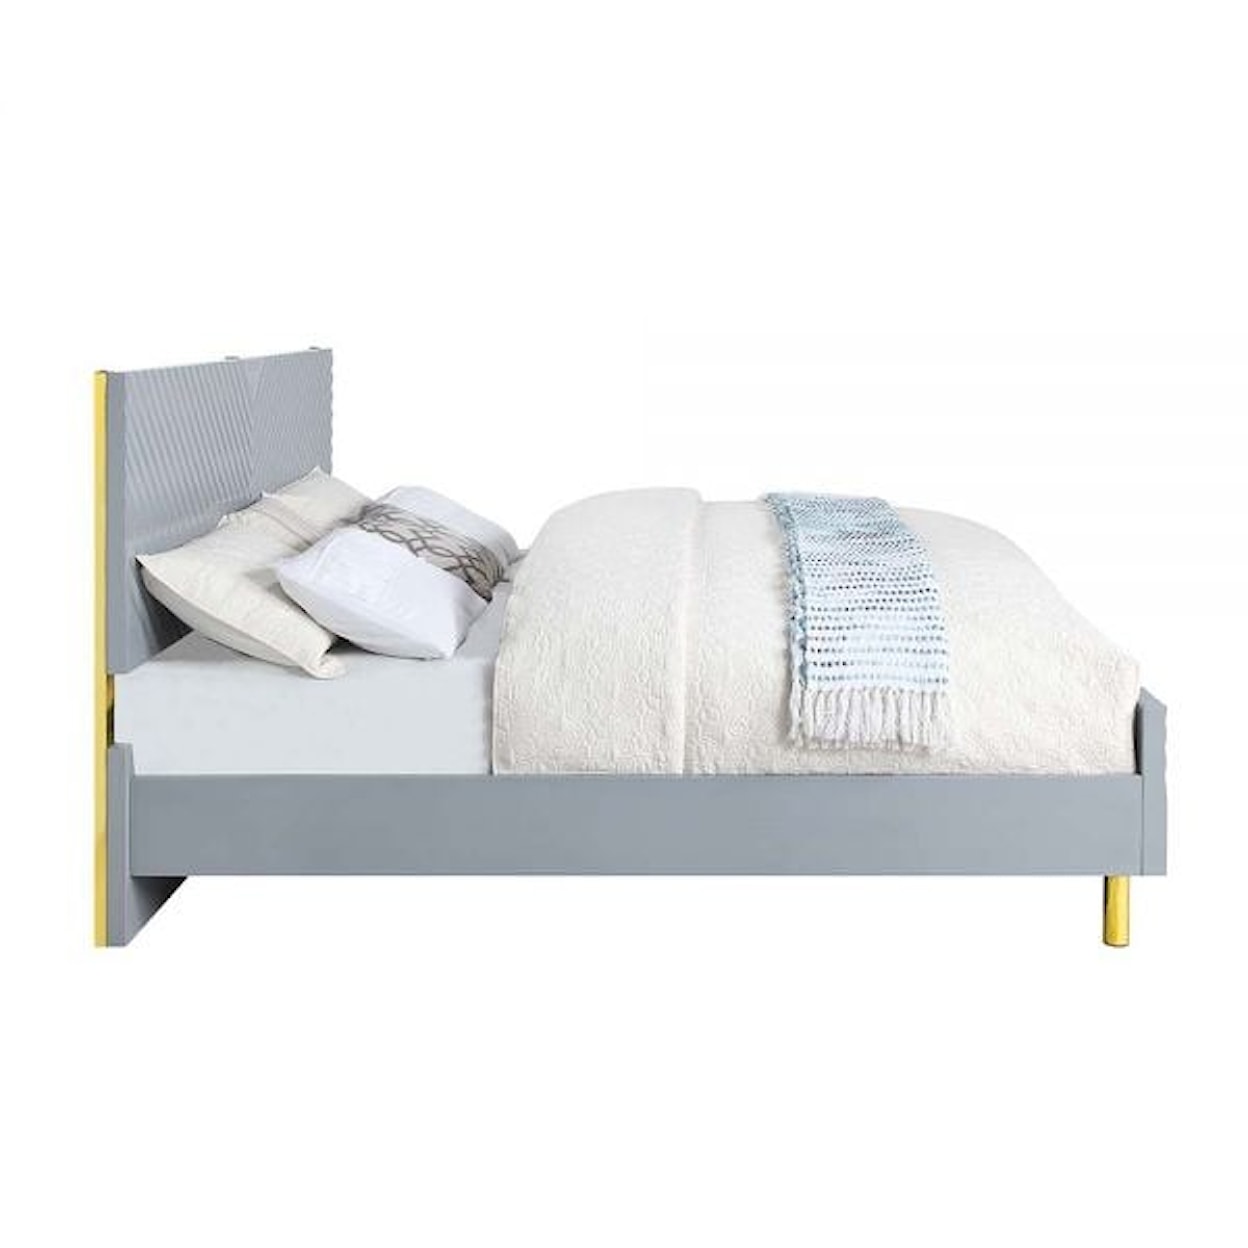 Acme Furniture Gaines Queen Bed